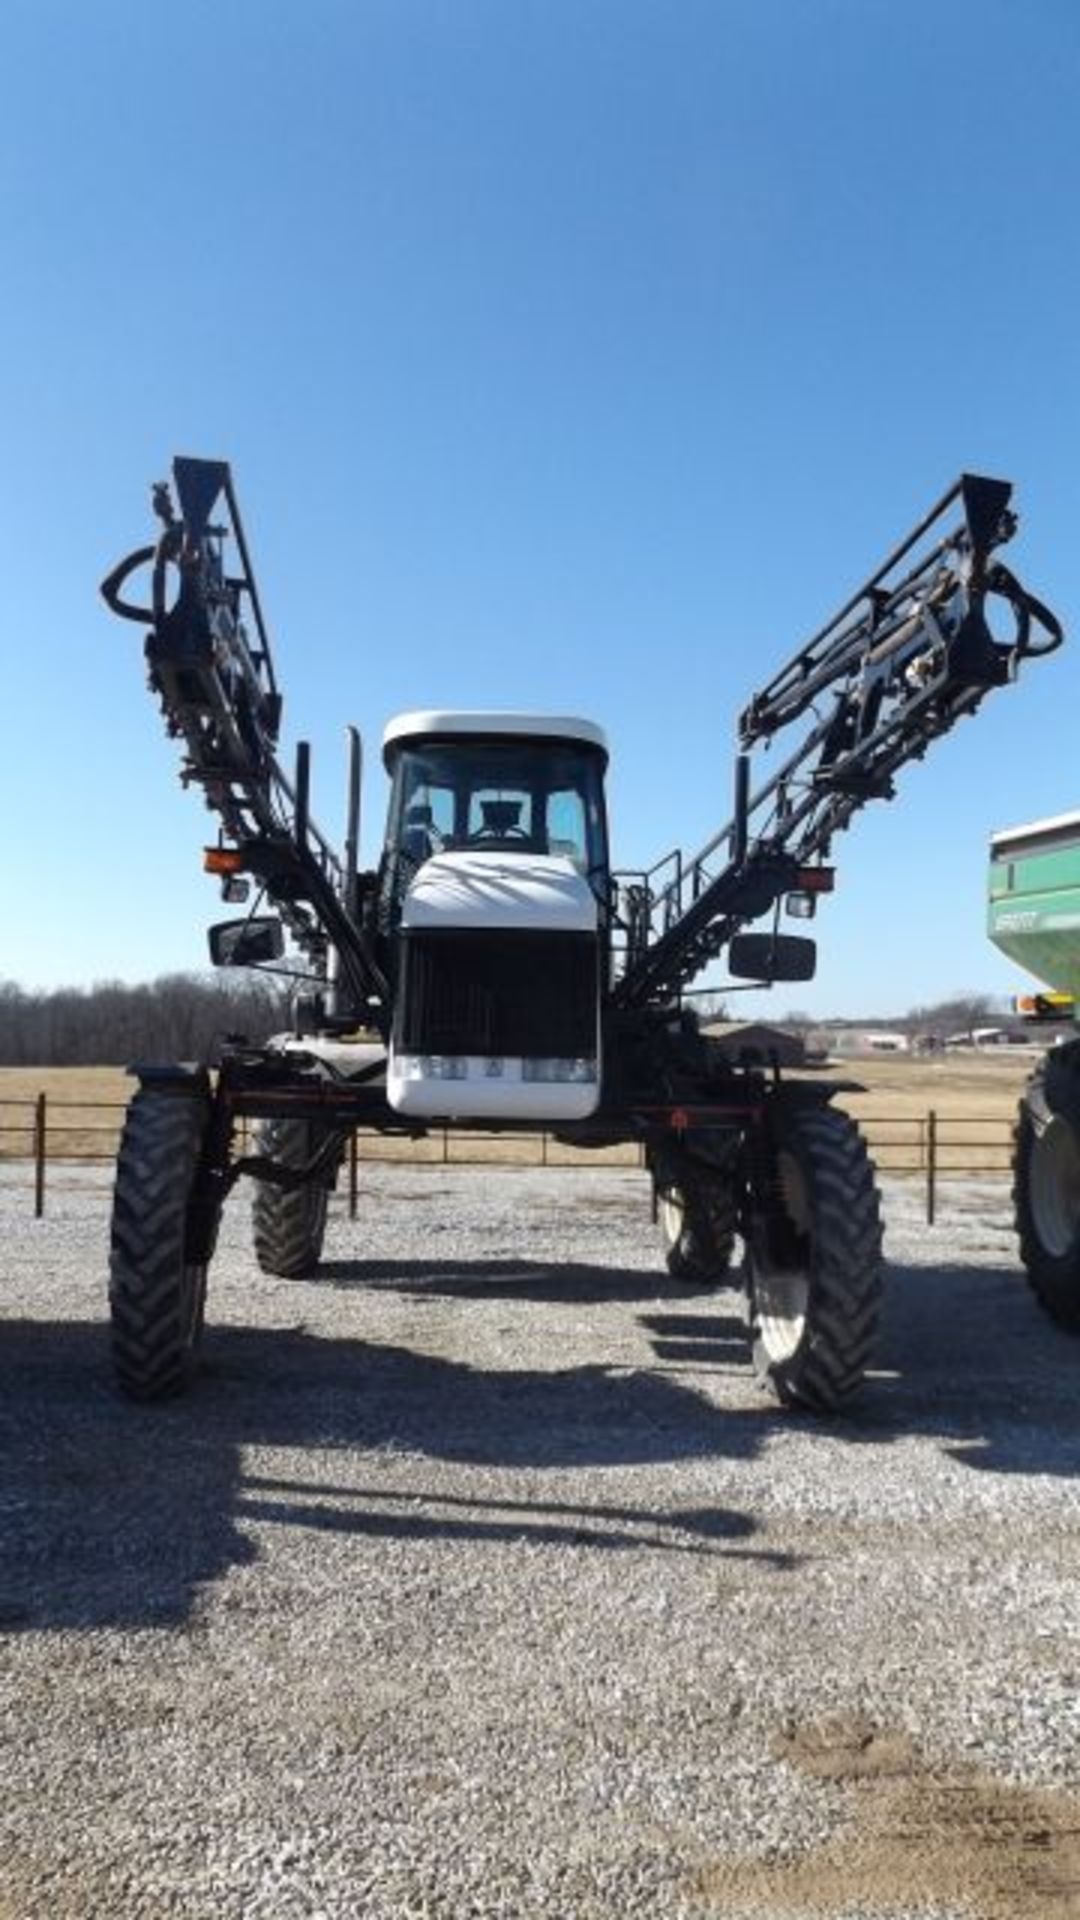 Spray Coupe 7650,2005 #153442,Sprayer, Hydro, Diesel, Rear Tires: Fs380-90r46, Front Tires: F.S. - Image 2 of 4